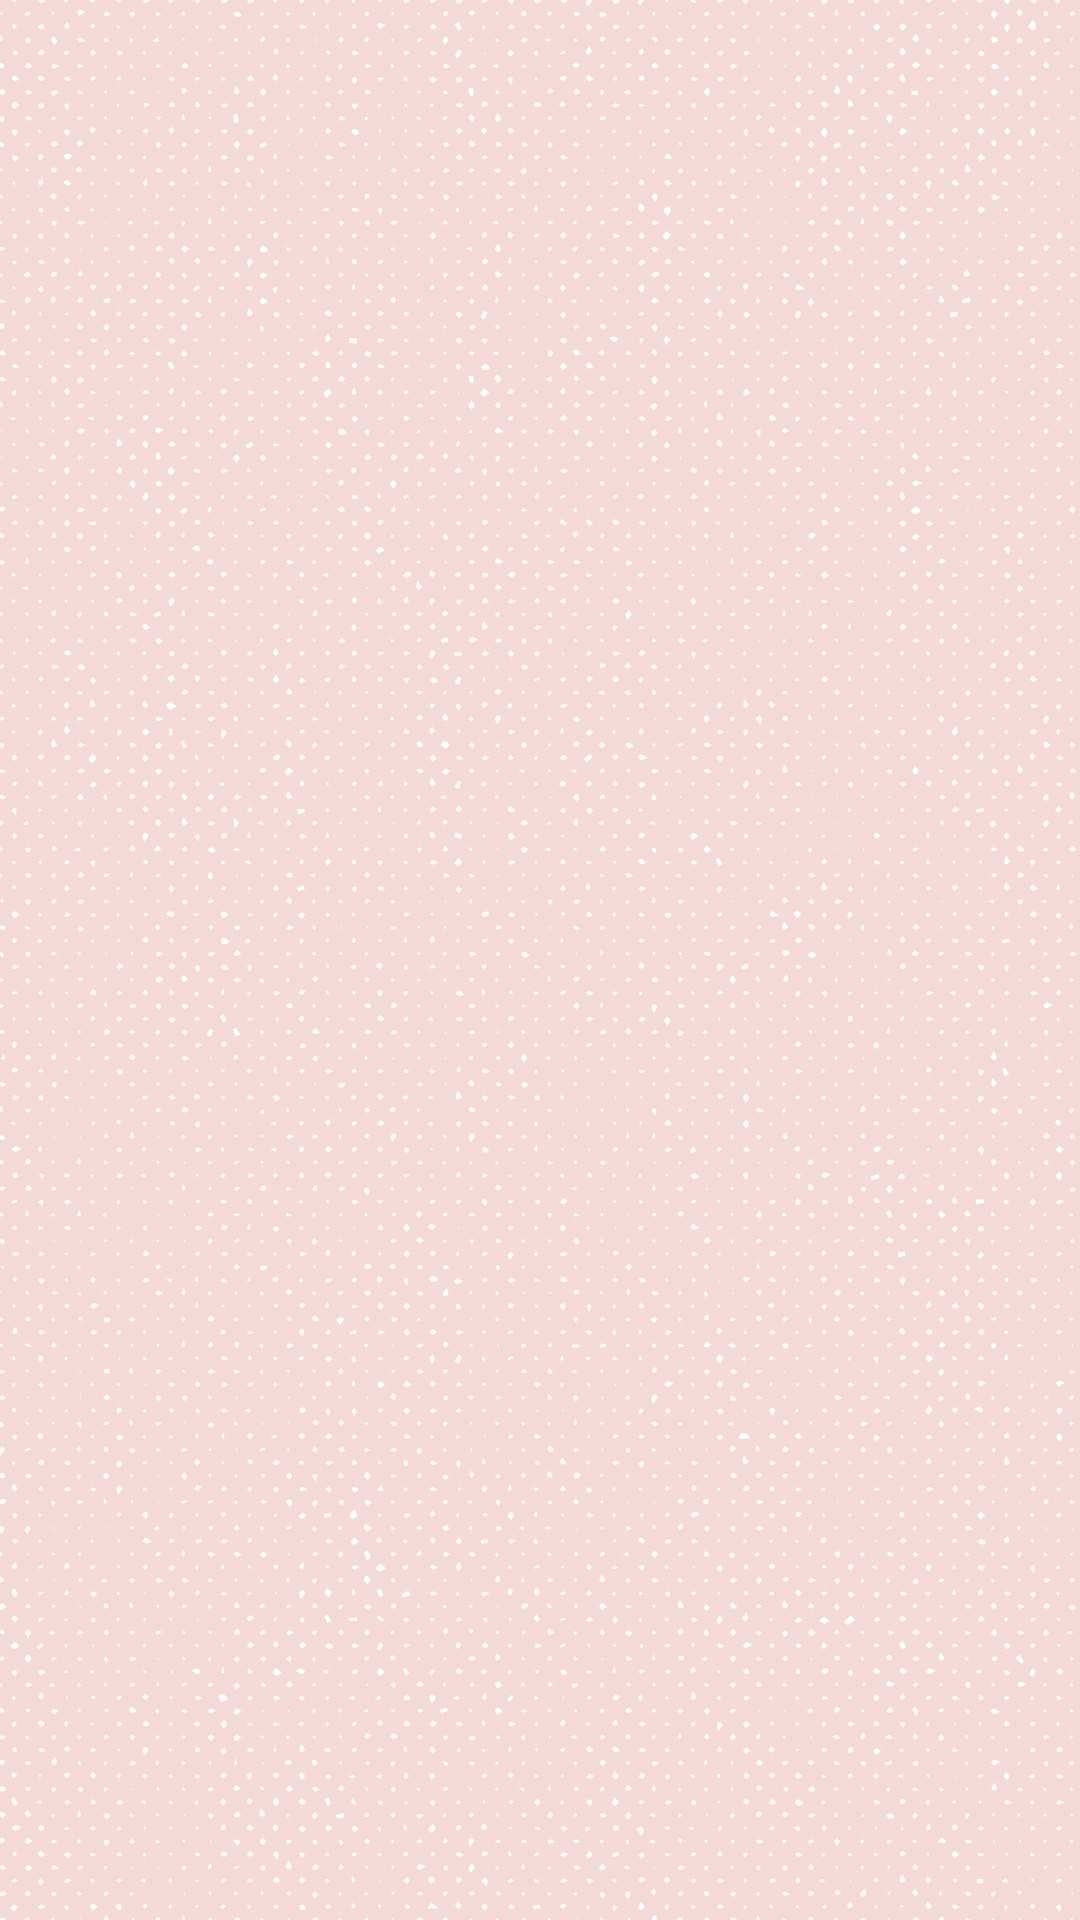 1080x1920 Pink Iphone Background Tumblr Image For Iphone Wallpaper Tumblr Cool  Wallpapers | 2017 Quotes .